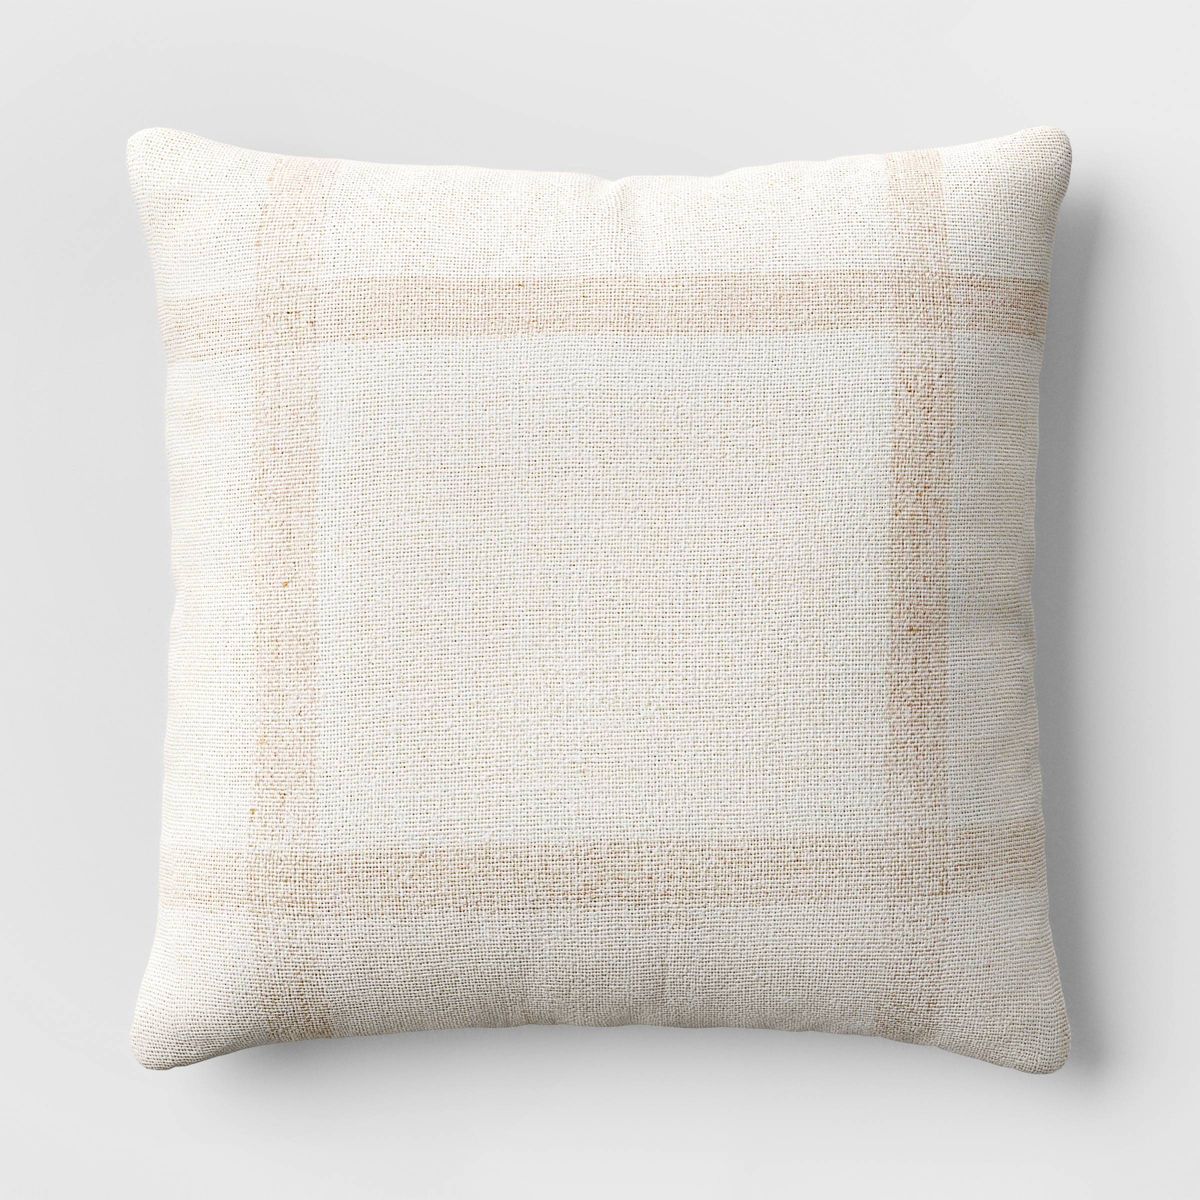 Oversized Woven Plaid Square Throw Pillow - Threshold™ | Target